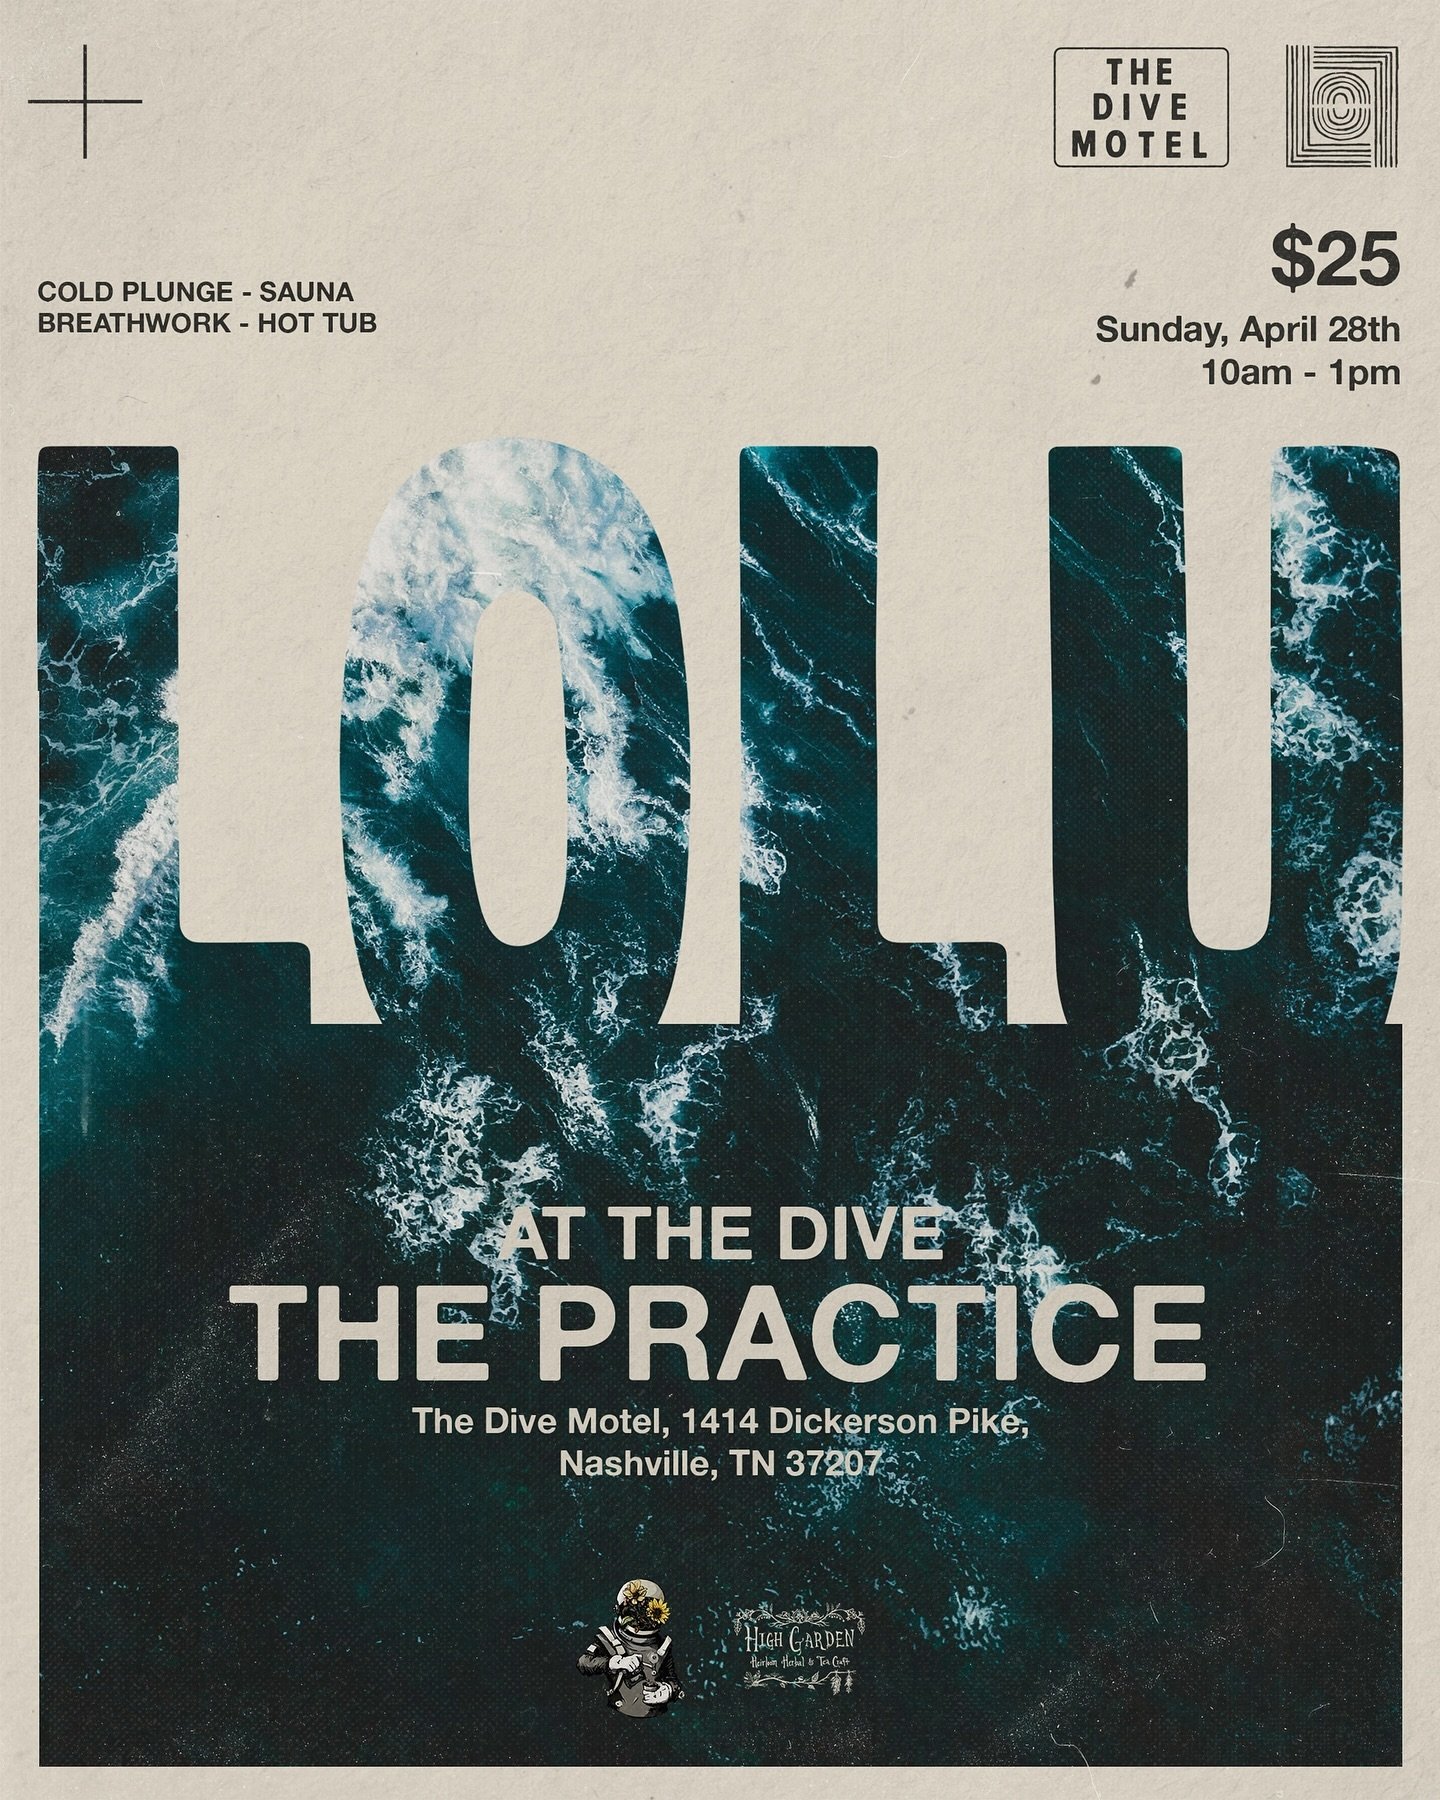 Next week 🌊 The last Lolu at The Dive 🙏
.
.
.
Poster: @danespearman @sickdesignco